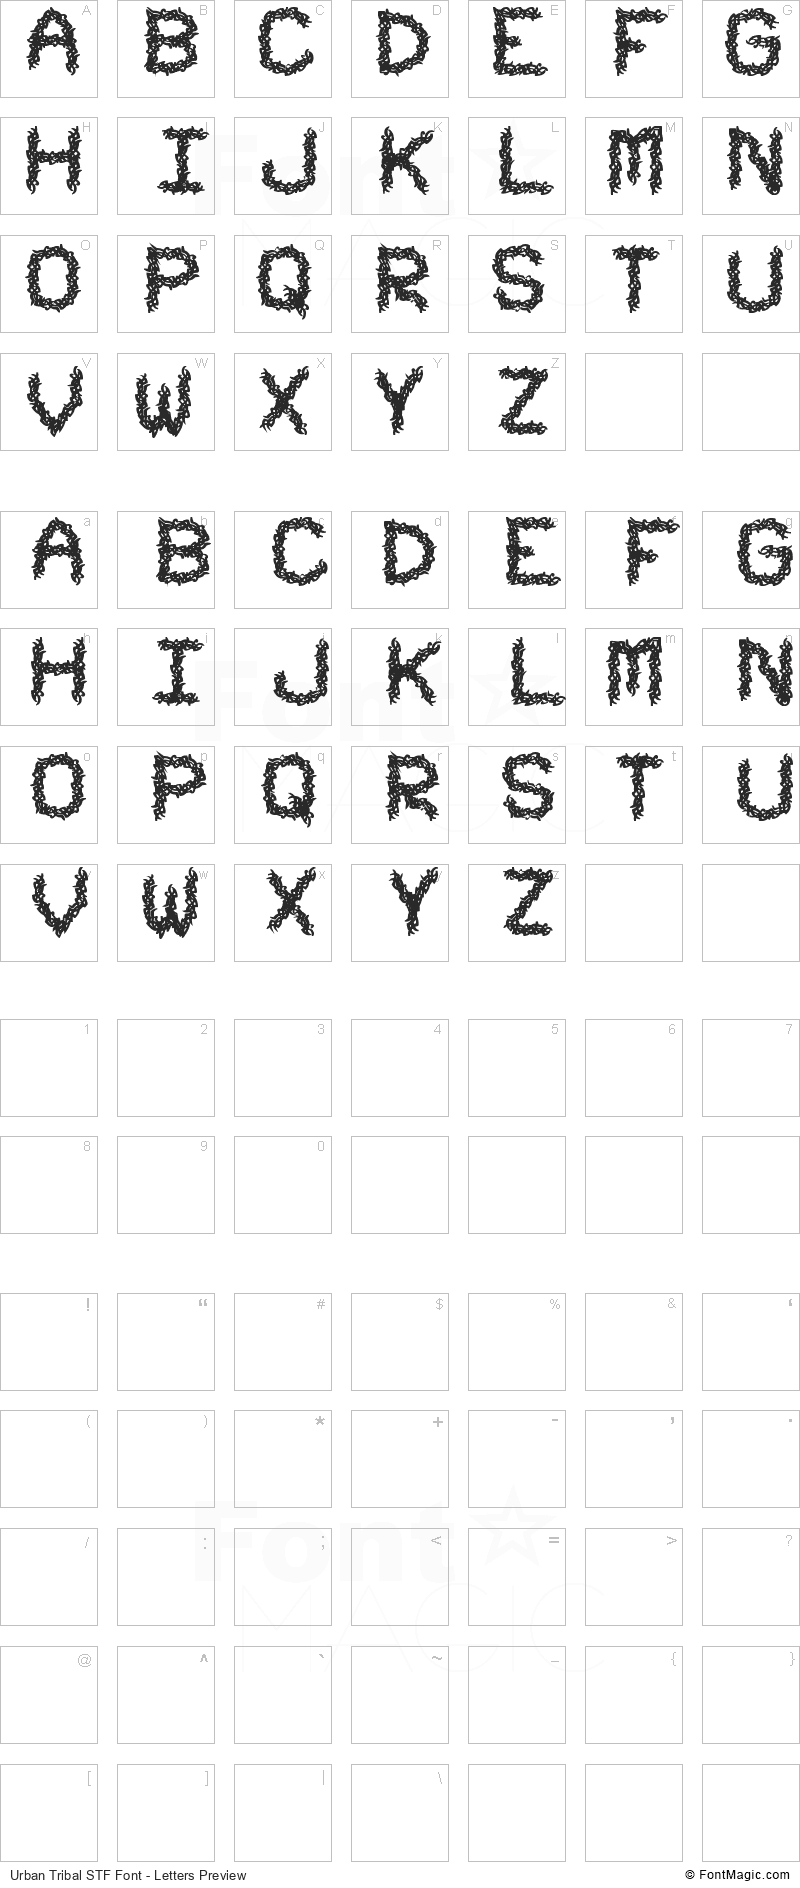 Urban Tribal STF Font - All Latters Preview Chart